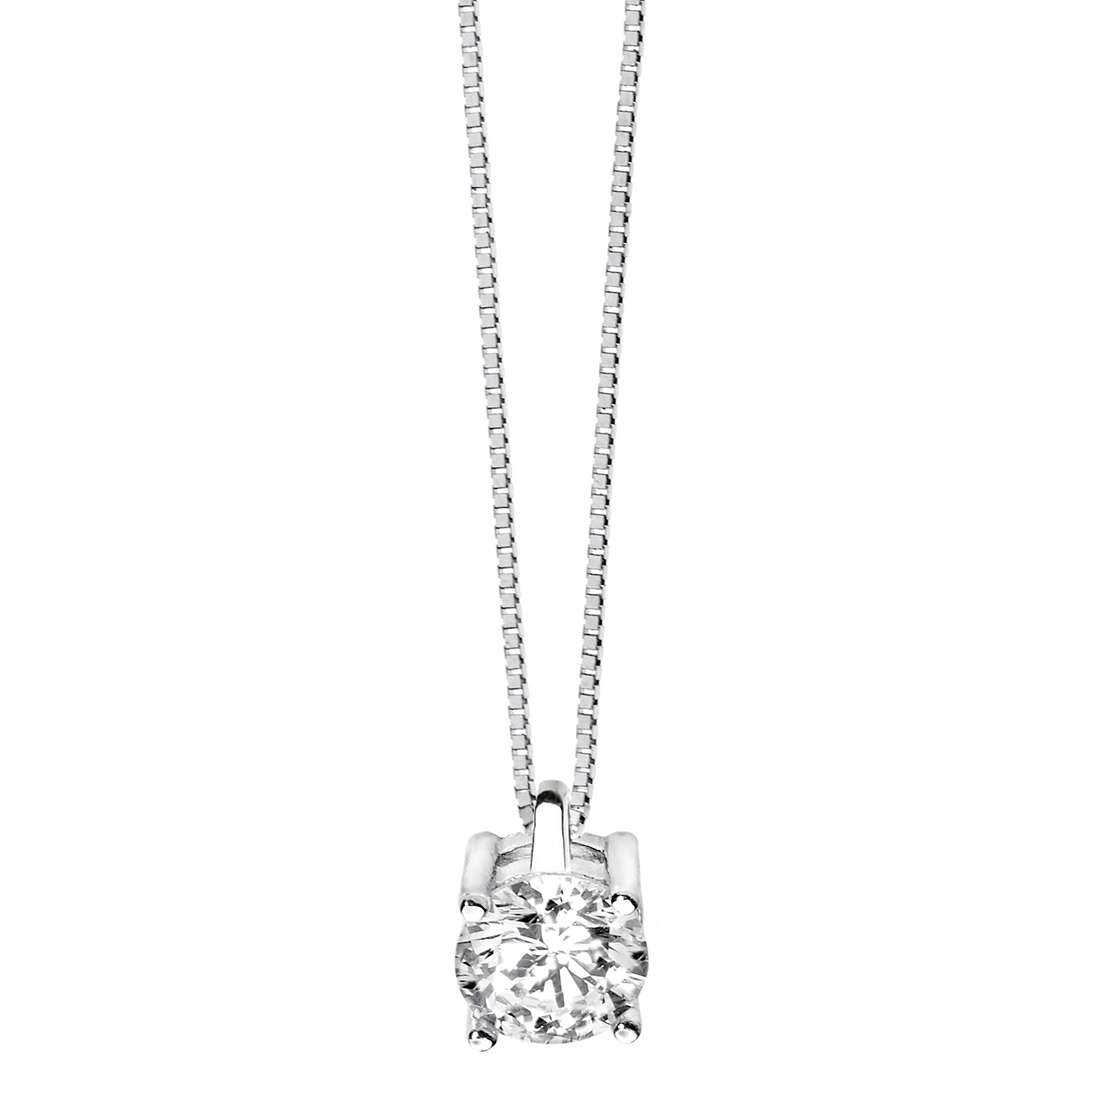 collier Point Lumineux Comete Or 18 kt GLB 981